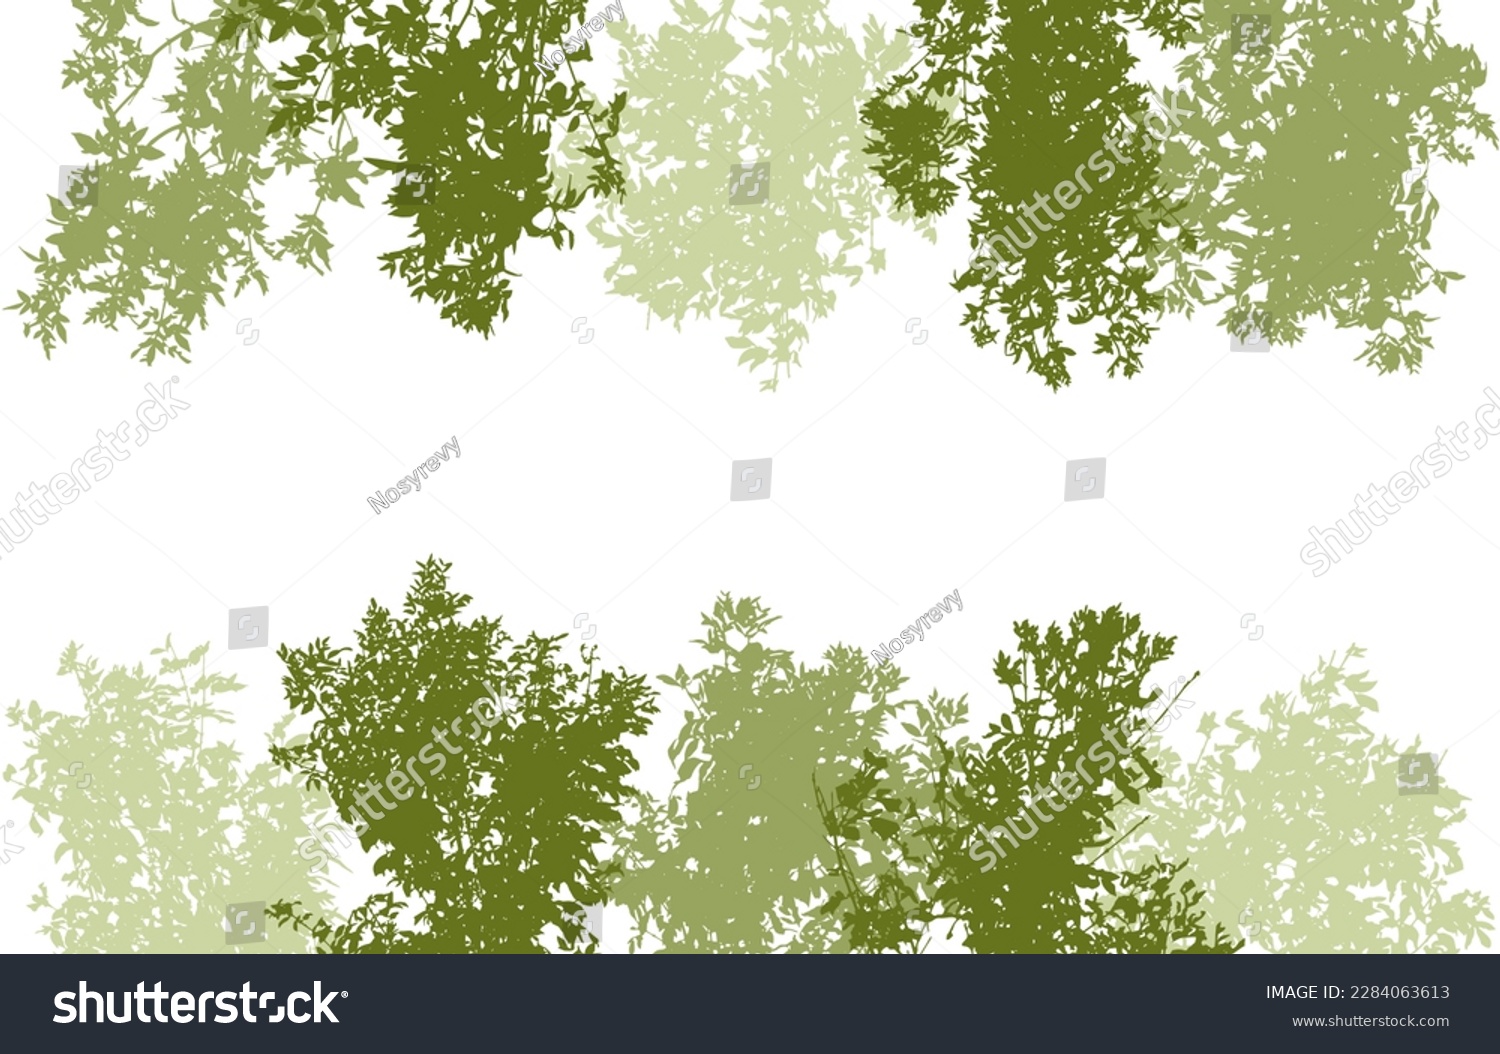 SVG of Deciduous branches of trees silhouette, background. Vector illustration svg